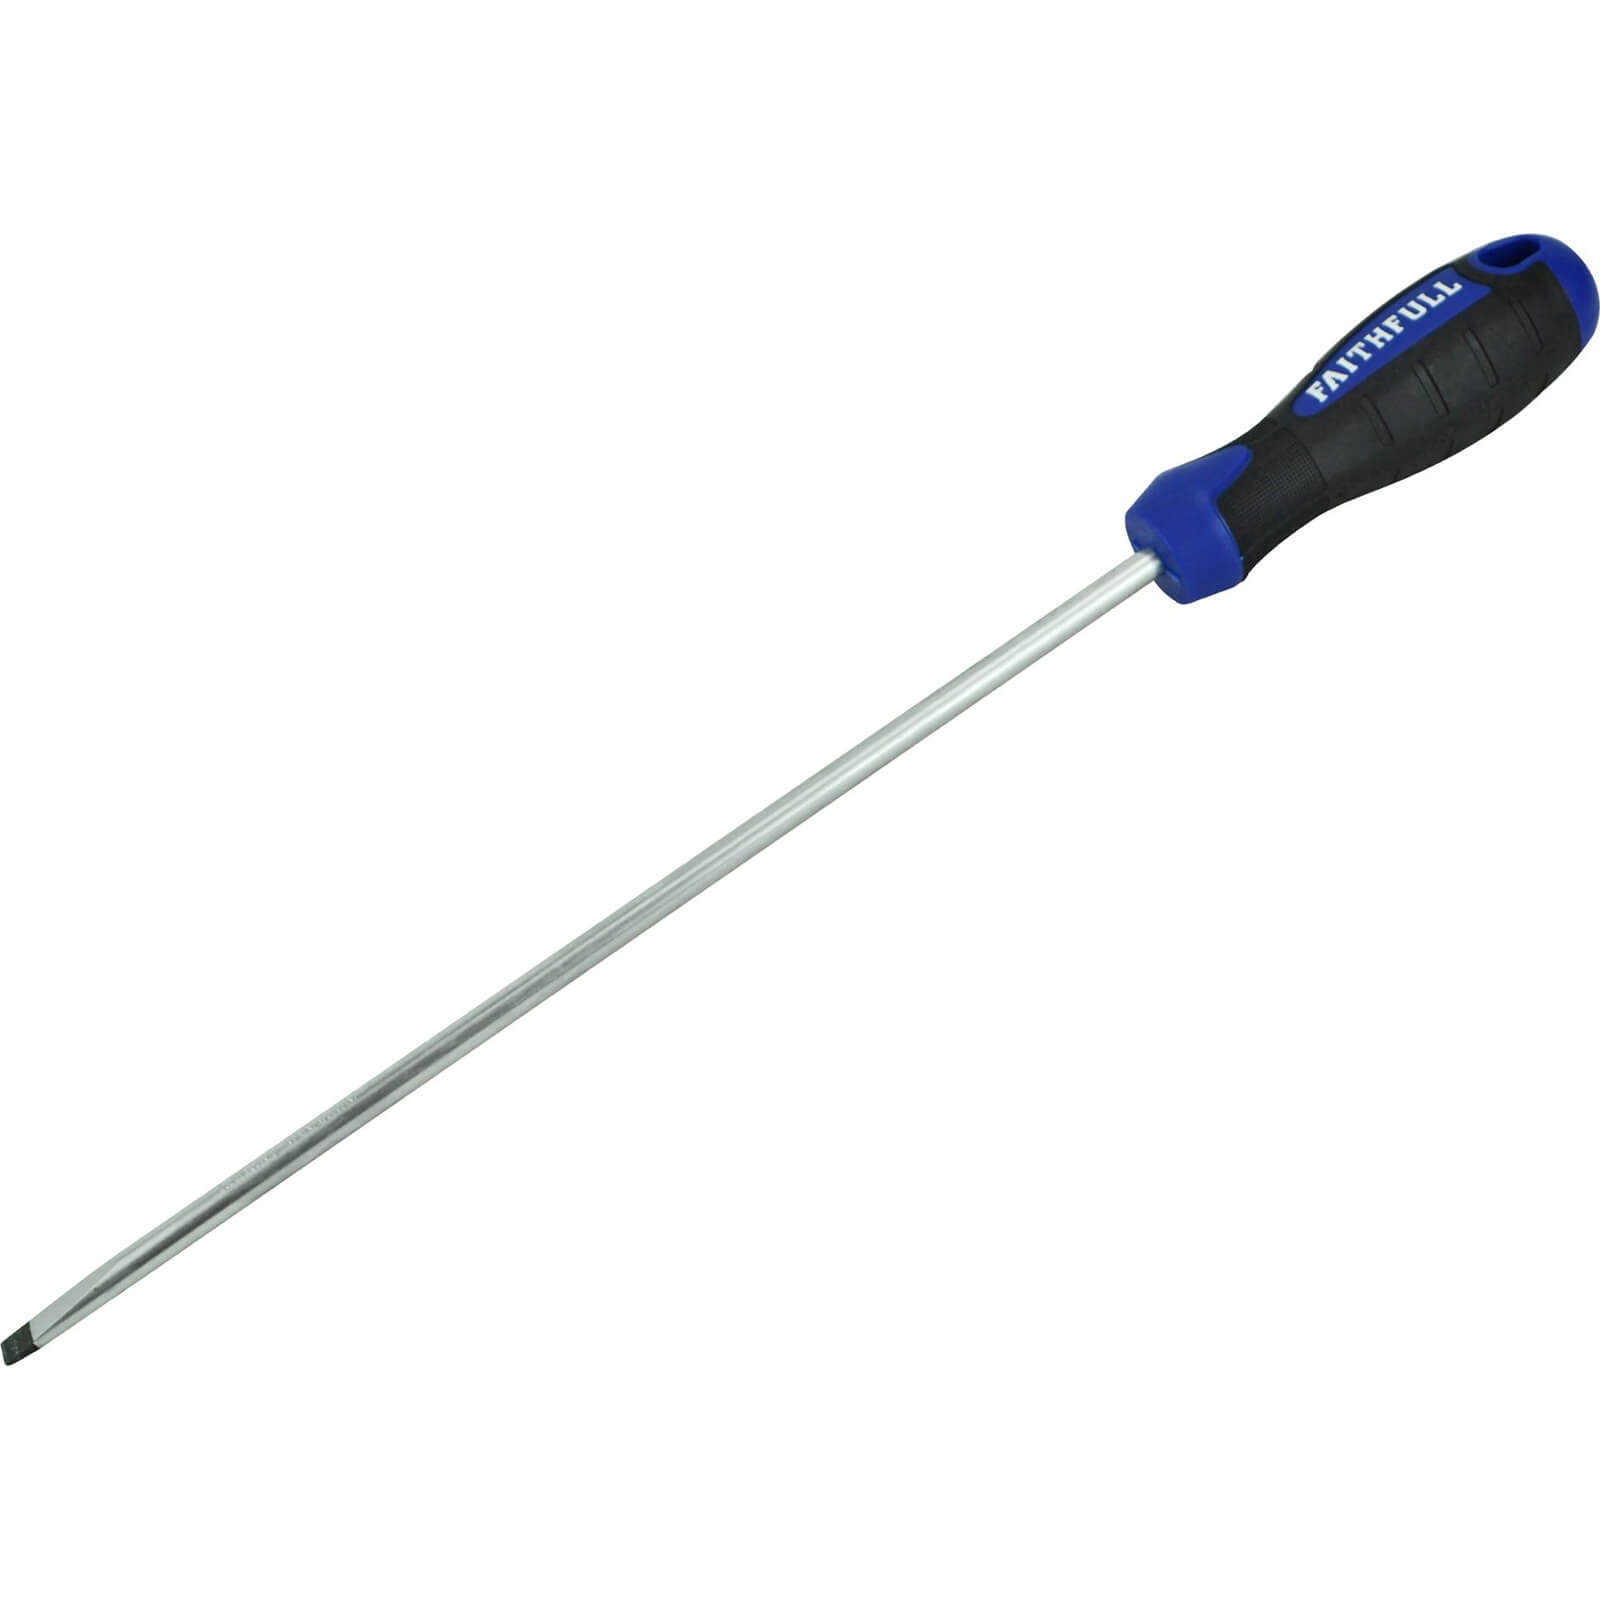 Image of Faithfull Soft Grip Flared Slotted Tip Screwdriver 10mm 250mm